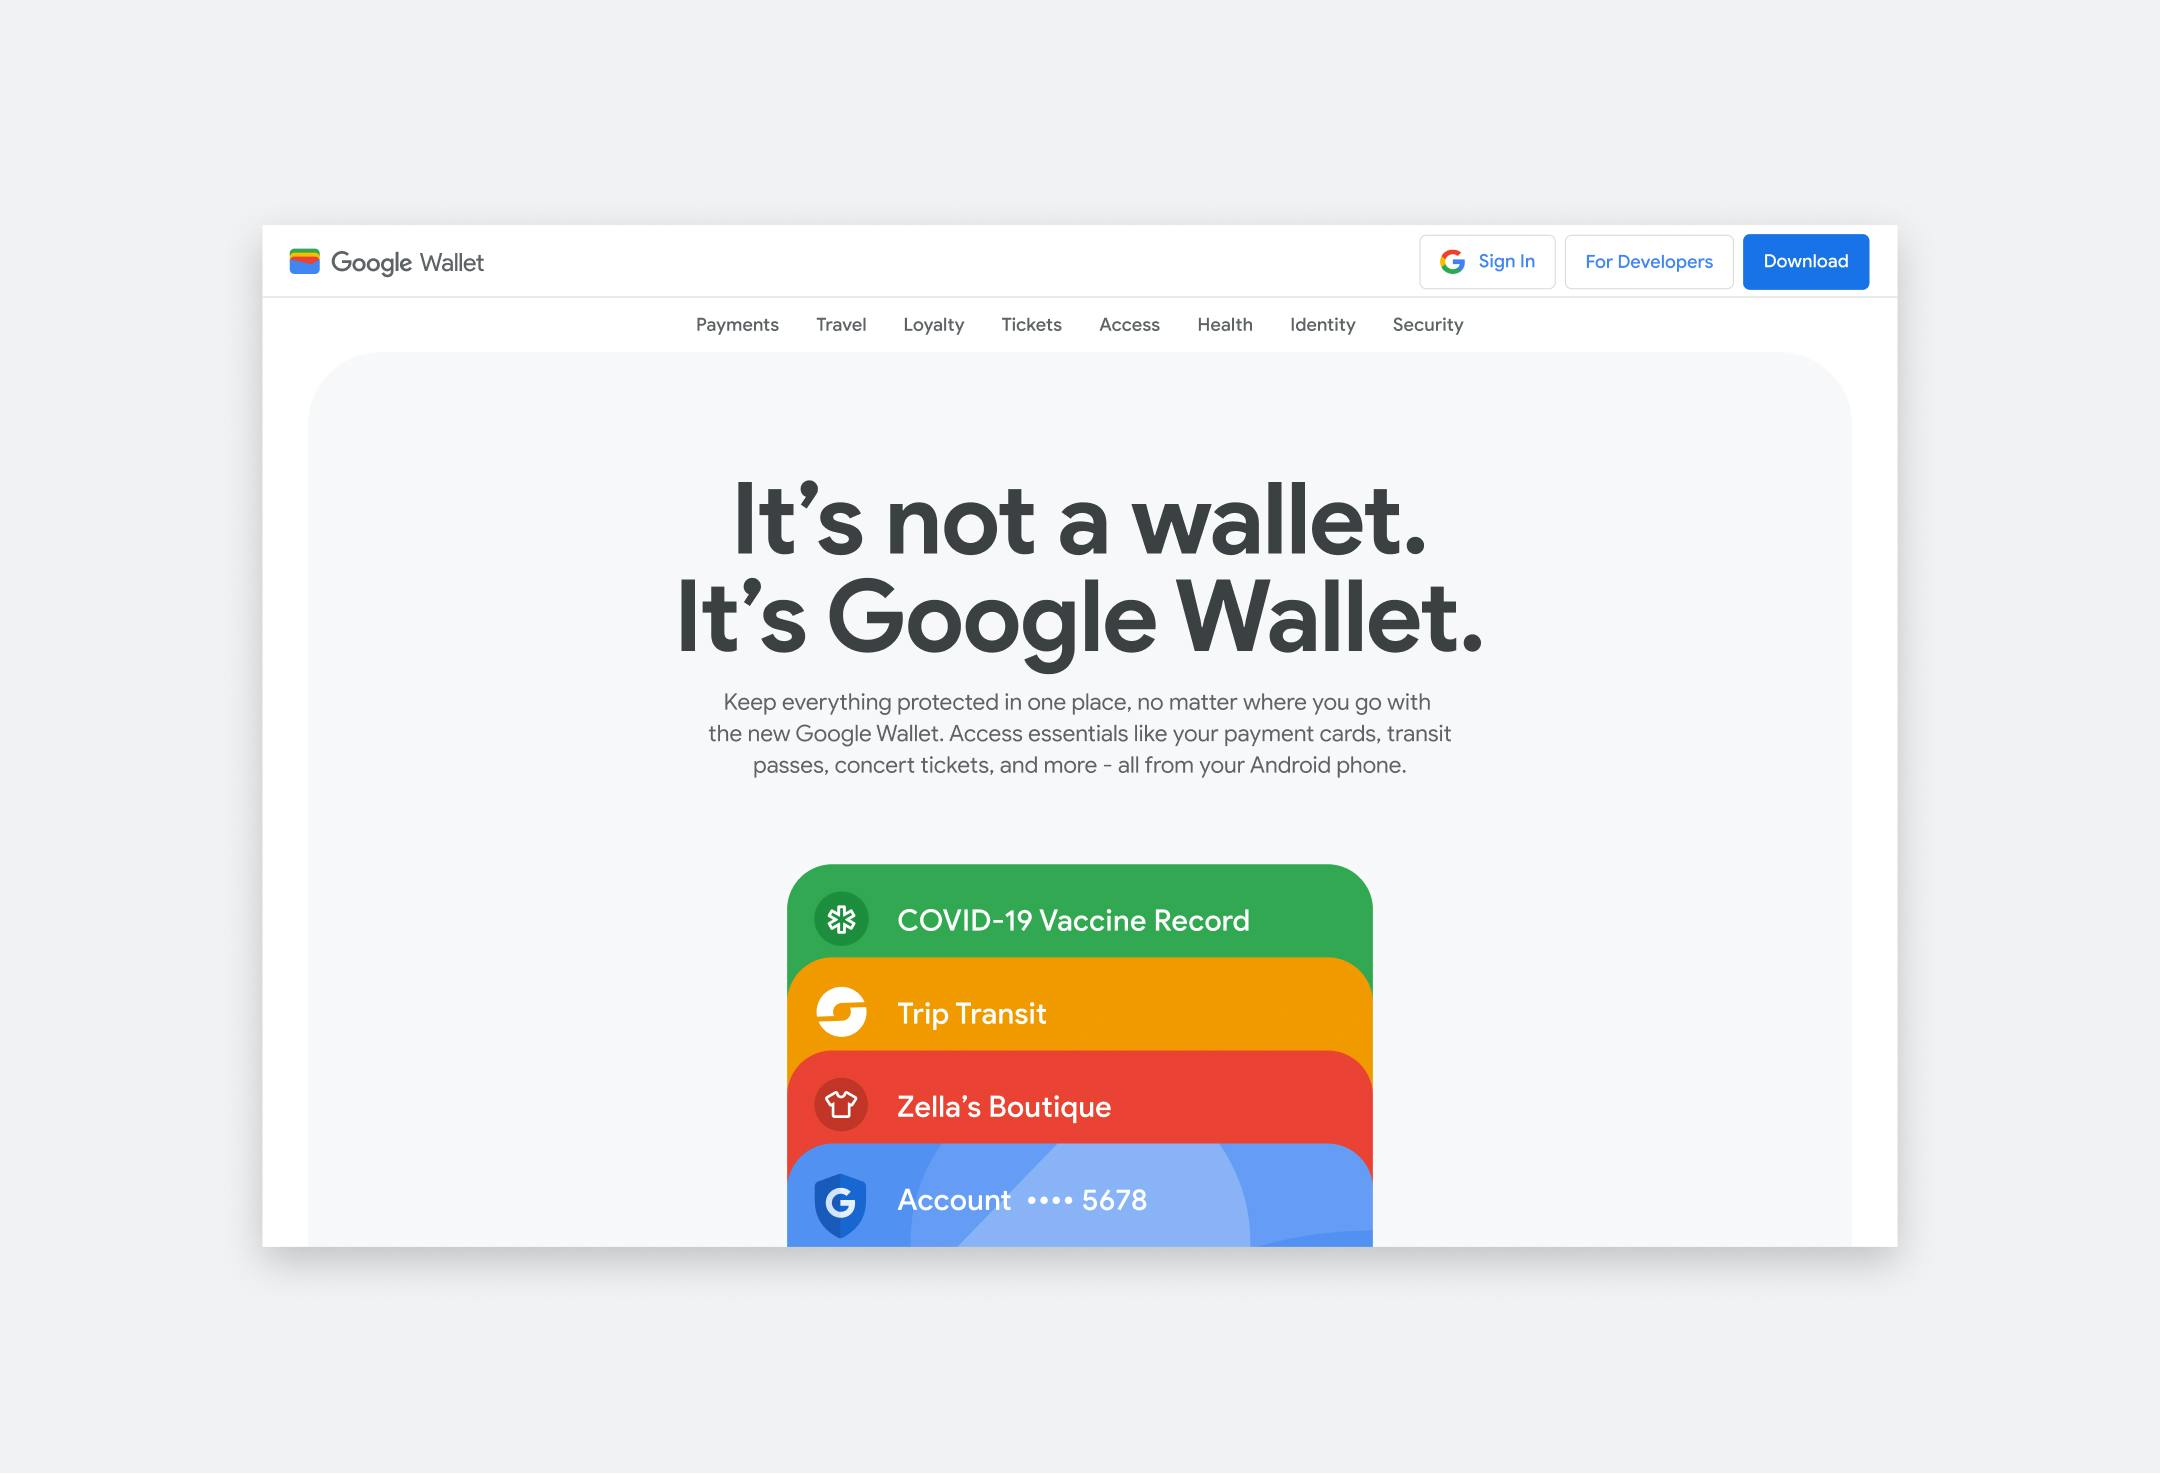 The Google Wallet page